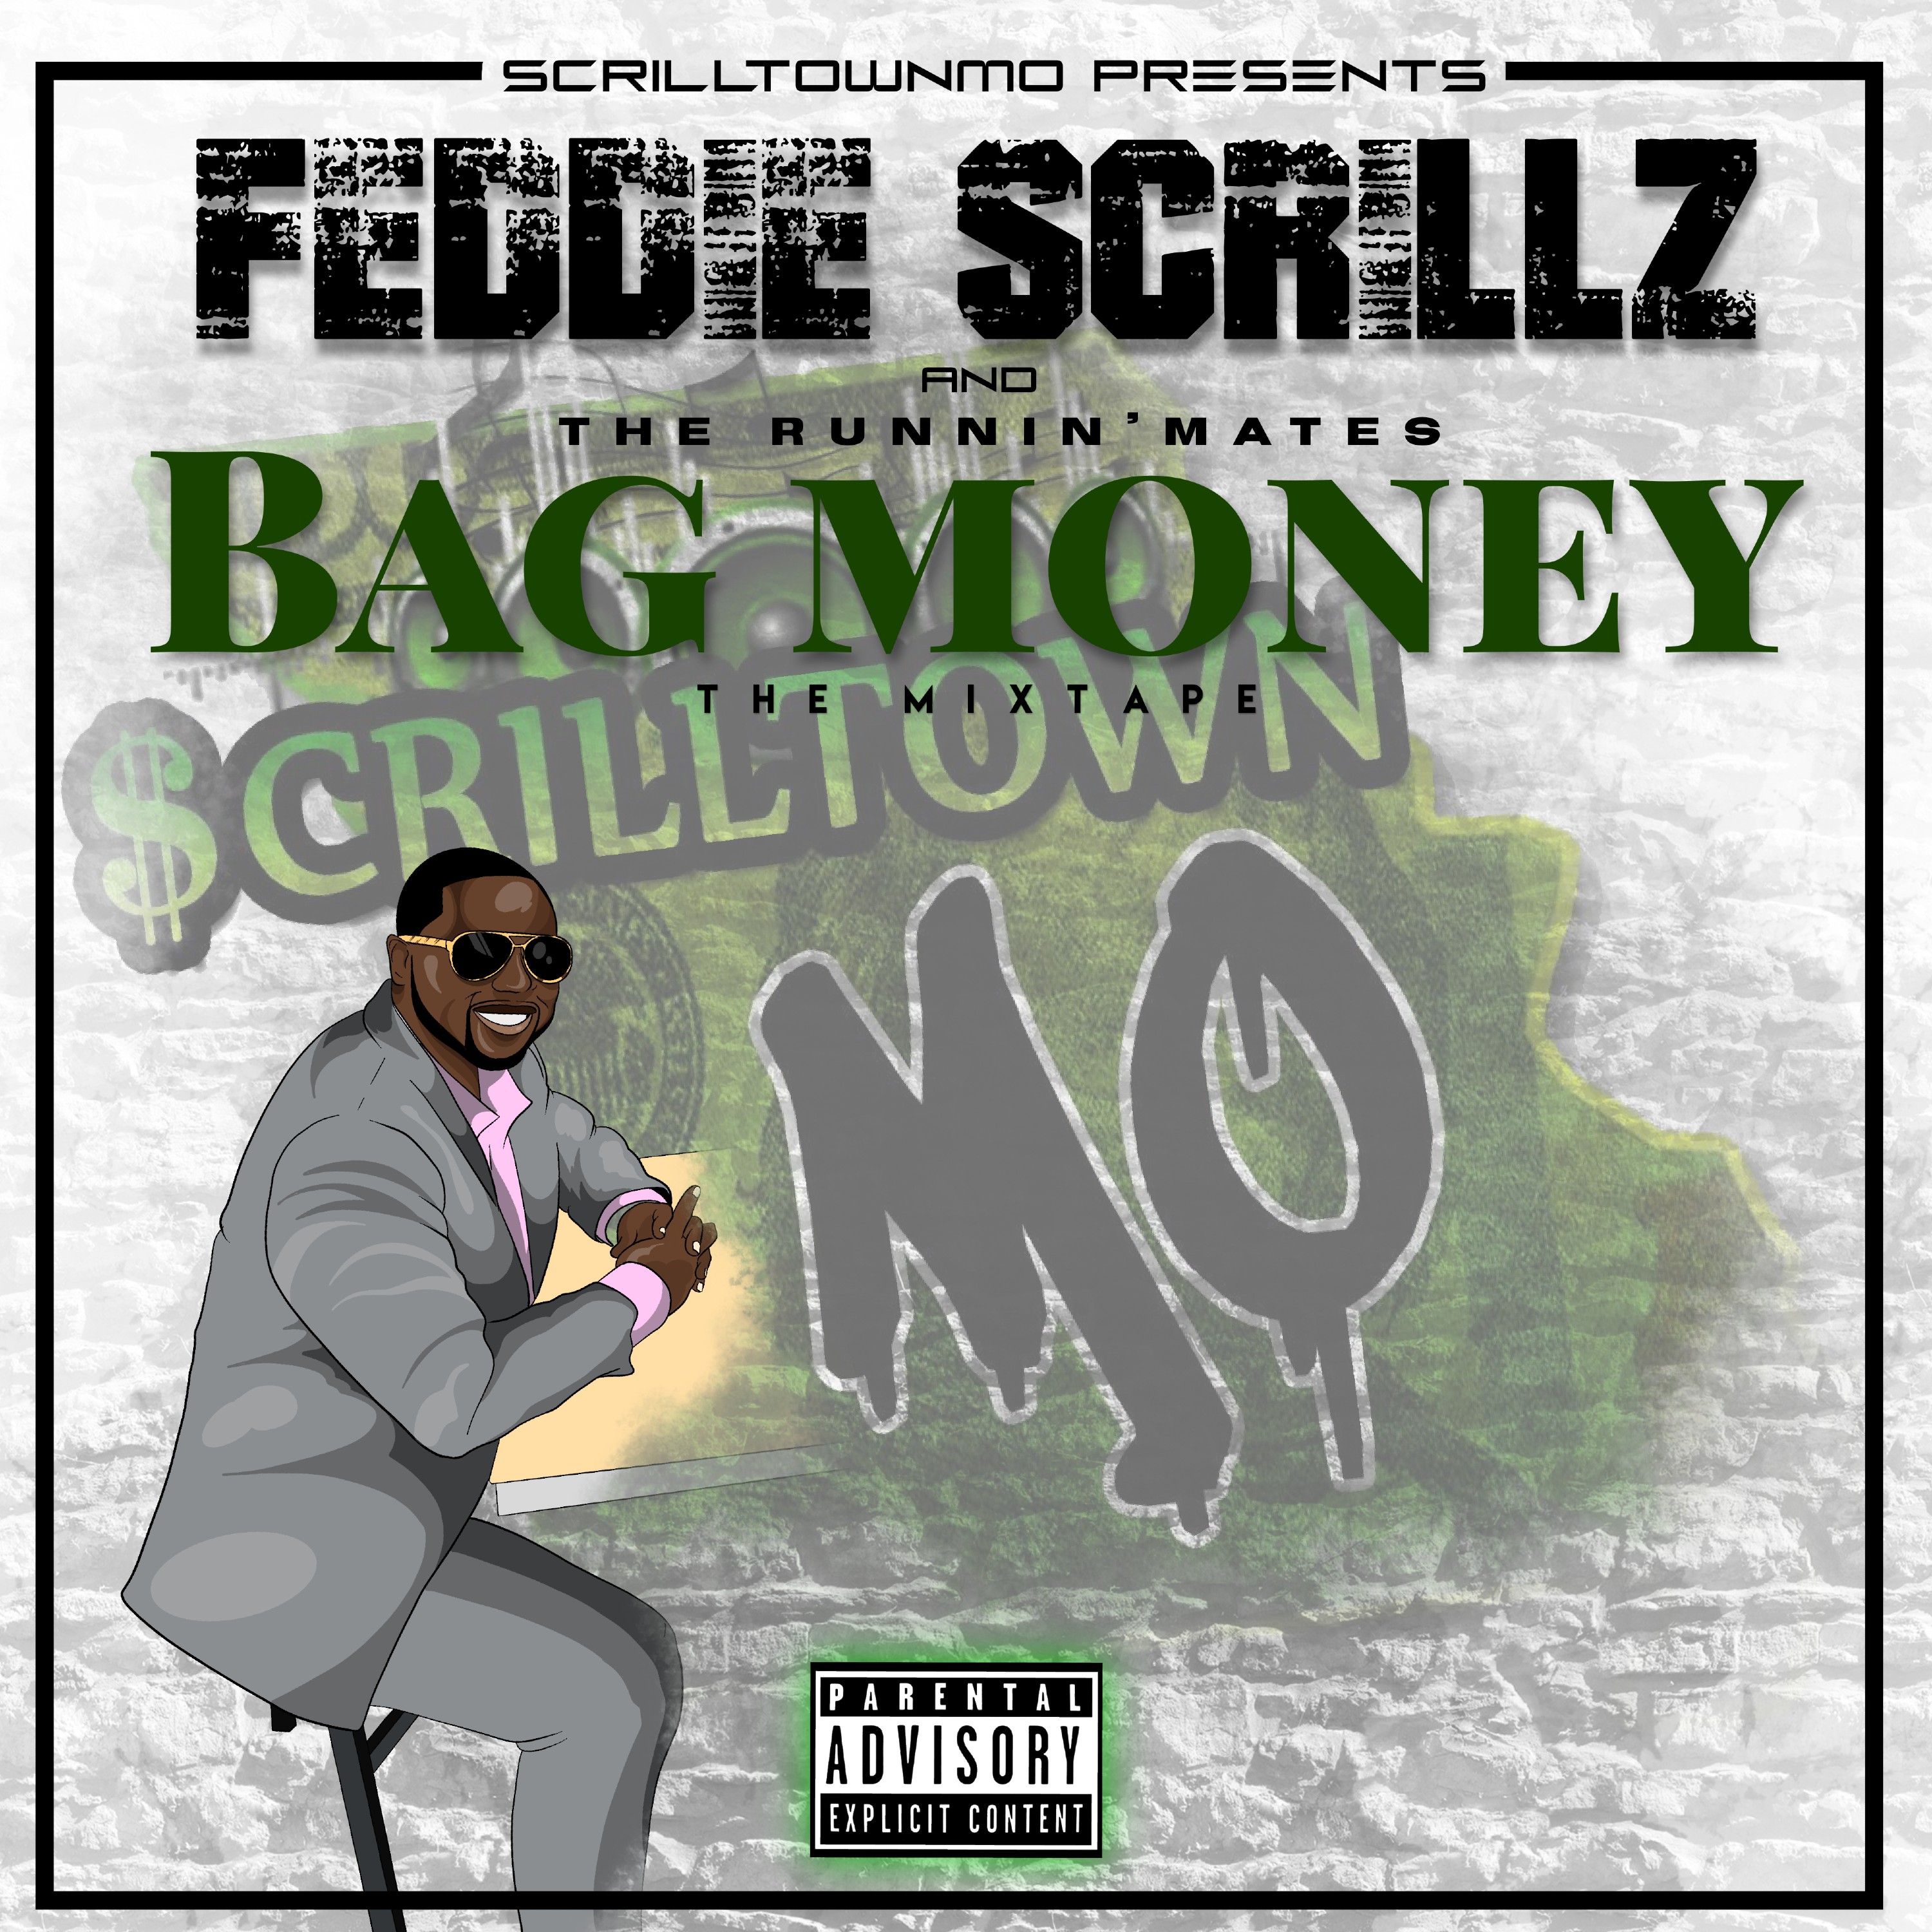 Art for Get the Bag  by Mansas Ace feat. Feddie Scrillz